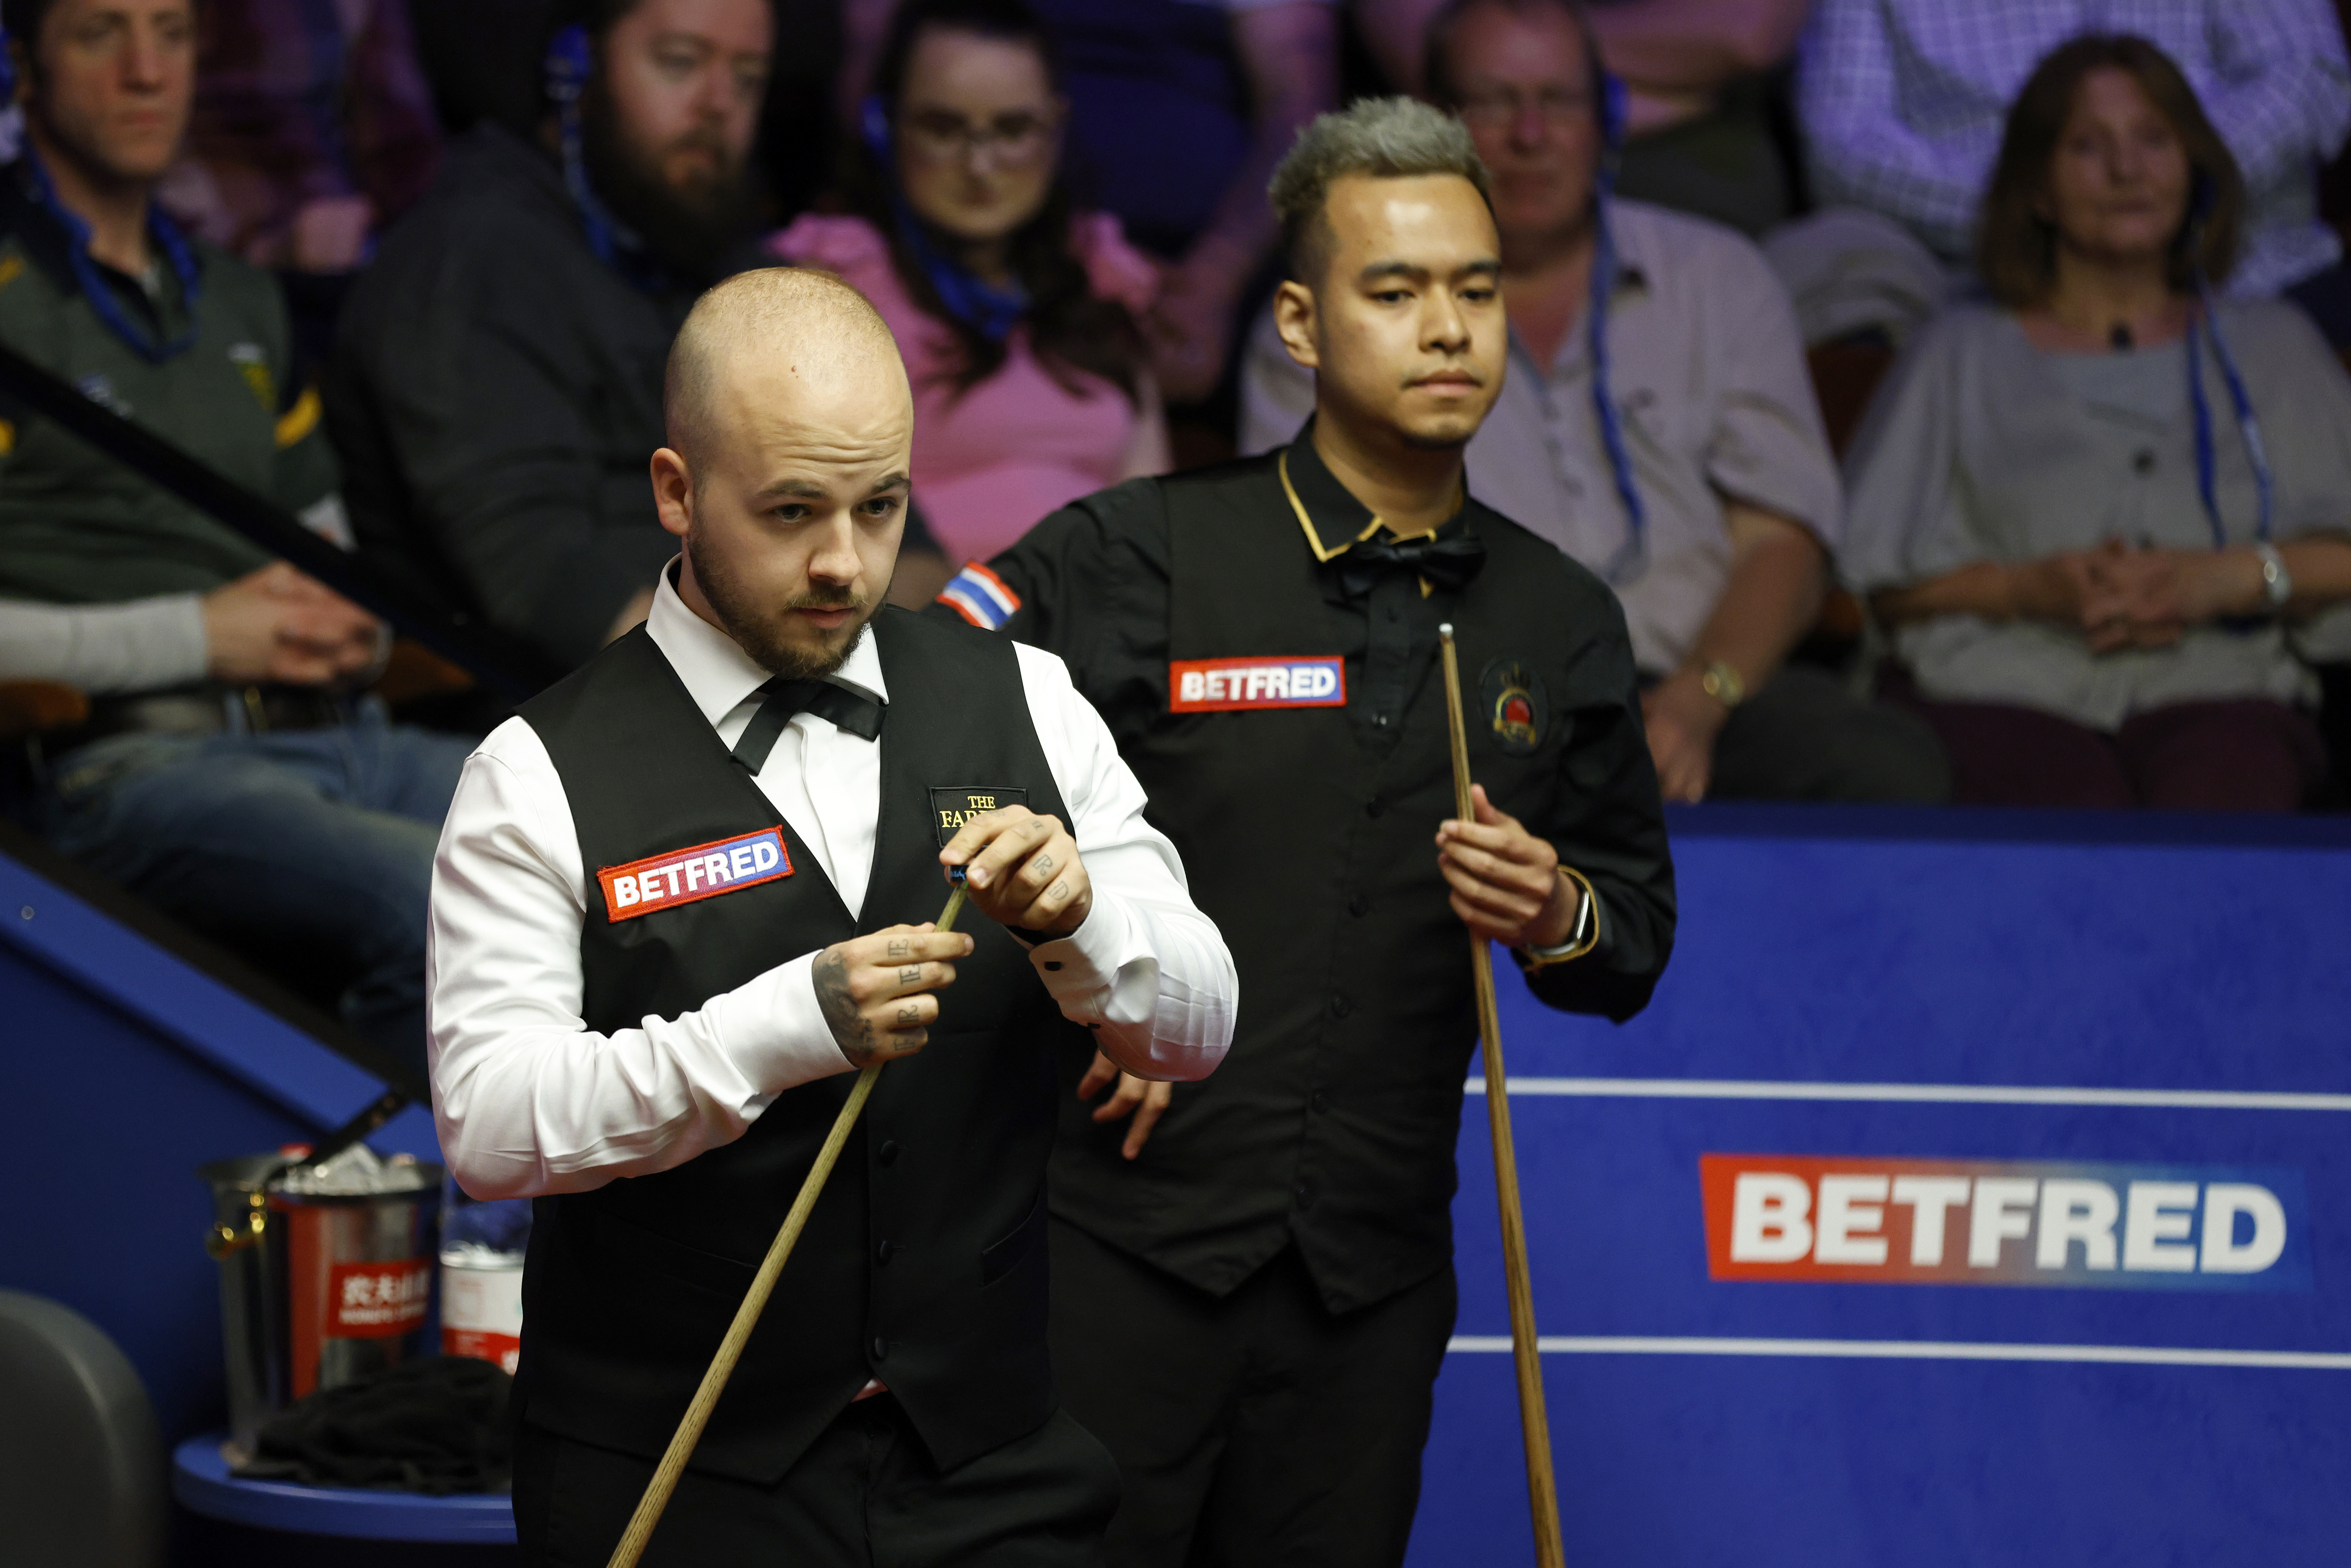 Noppon Saengkham beats Luca Brecel to book place in second round NewsChain